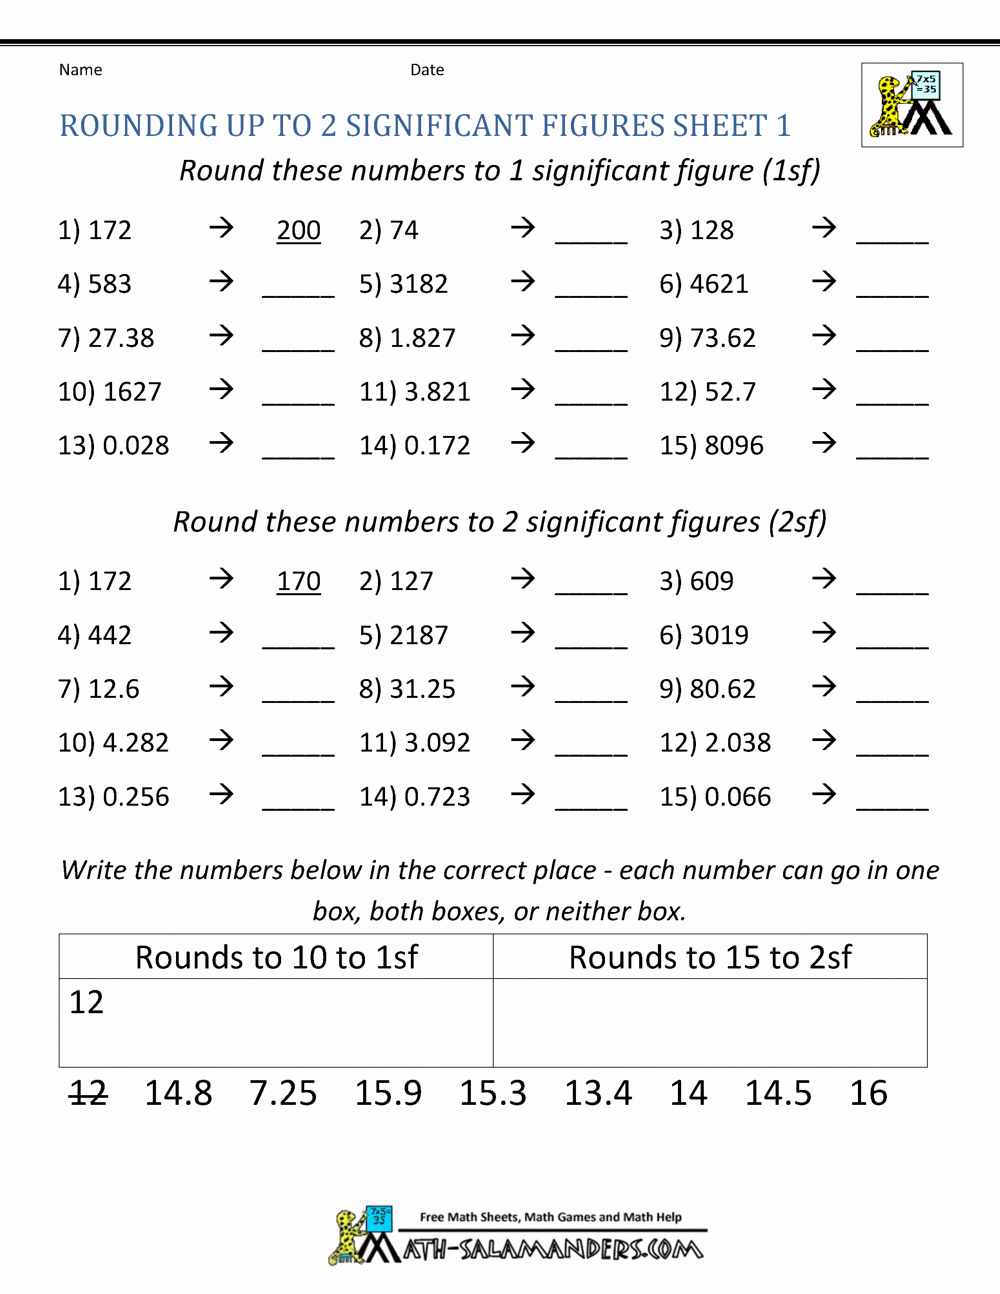 Significant Figures Worksheet Answers Elegant Rounding Significant Figures